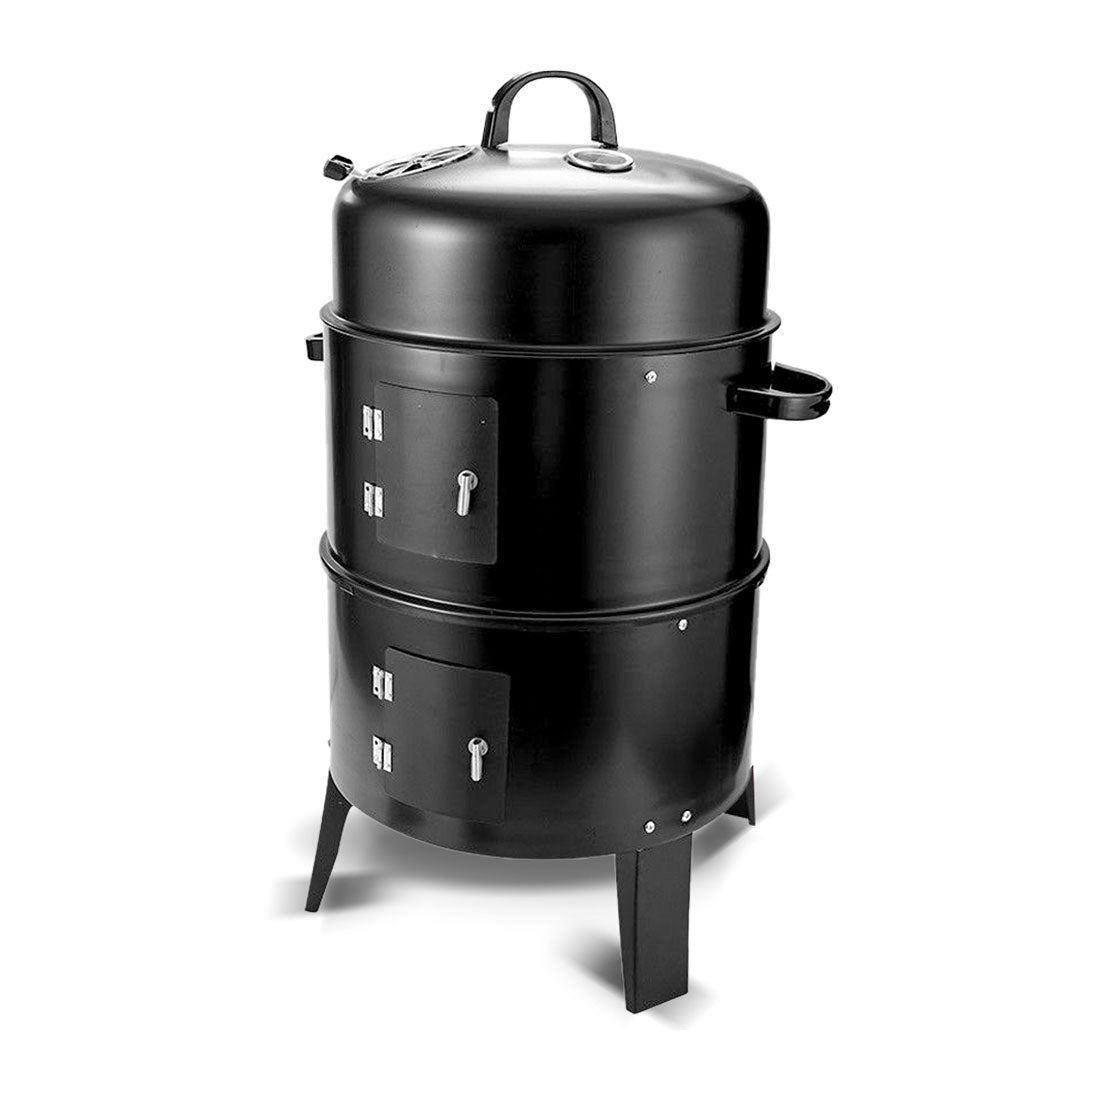 NEW 3in1 Portable Charcoal Vertical Smoker BBQ Roaster Grill Steel Water Steamer